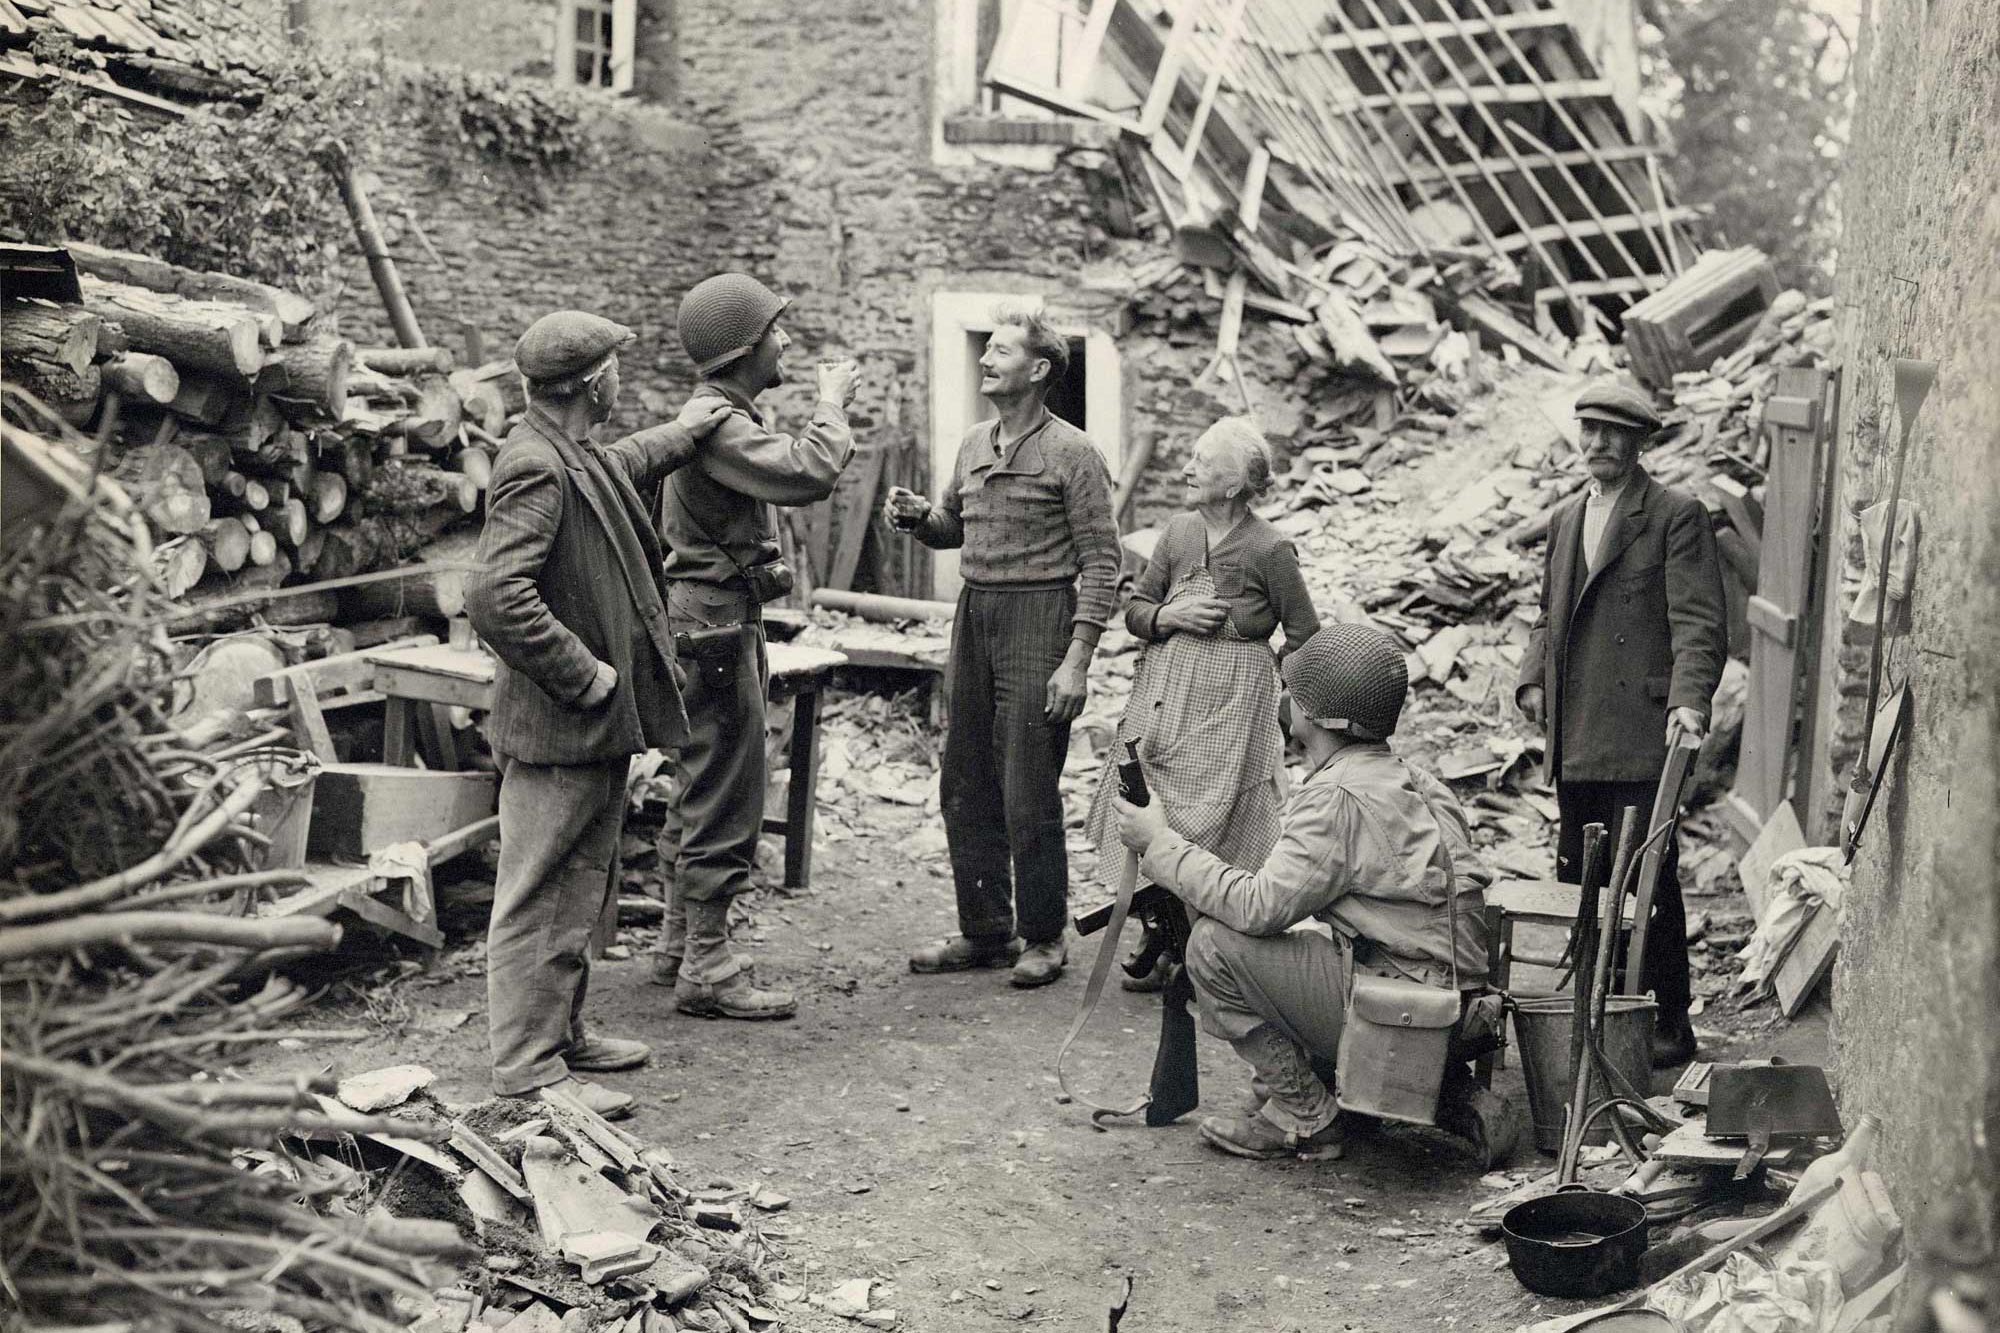 An American Army officer and a French civilian share a toast in the middle of street filled with rubble